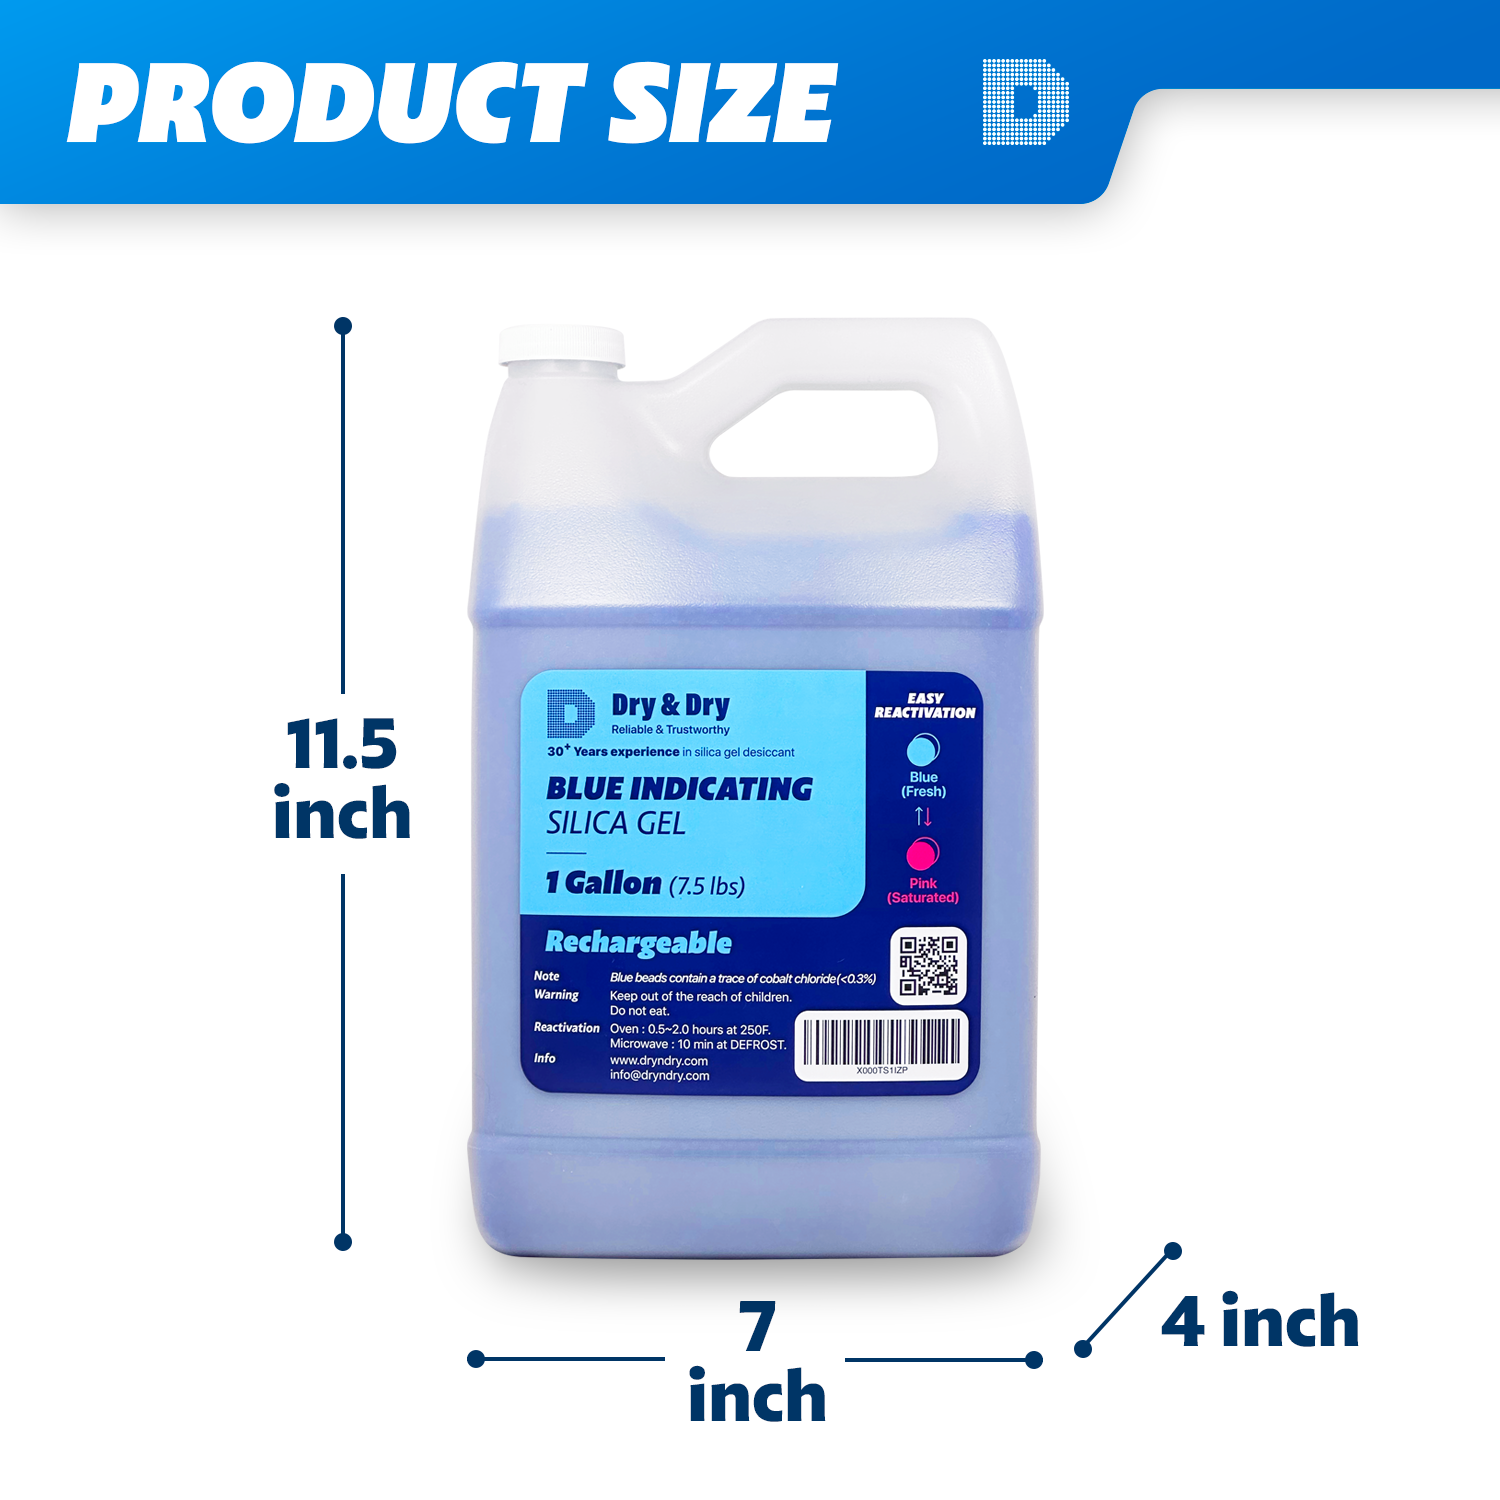 1 Gallon(7.5 LBS) "Dry & Dry" Premium Blue Indicating Silica Gel Desiccant Beads(3-5 mm)